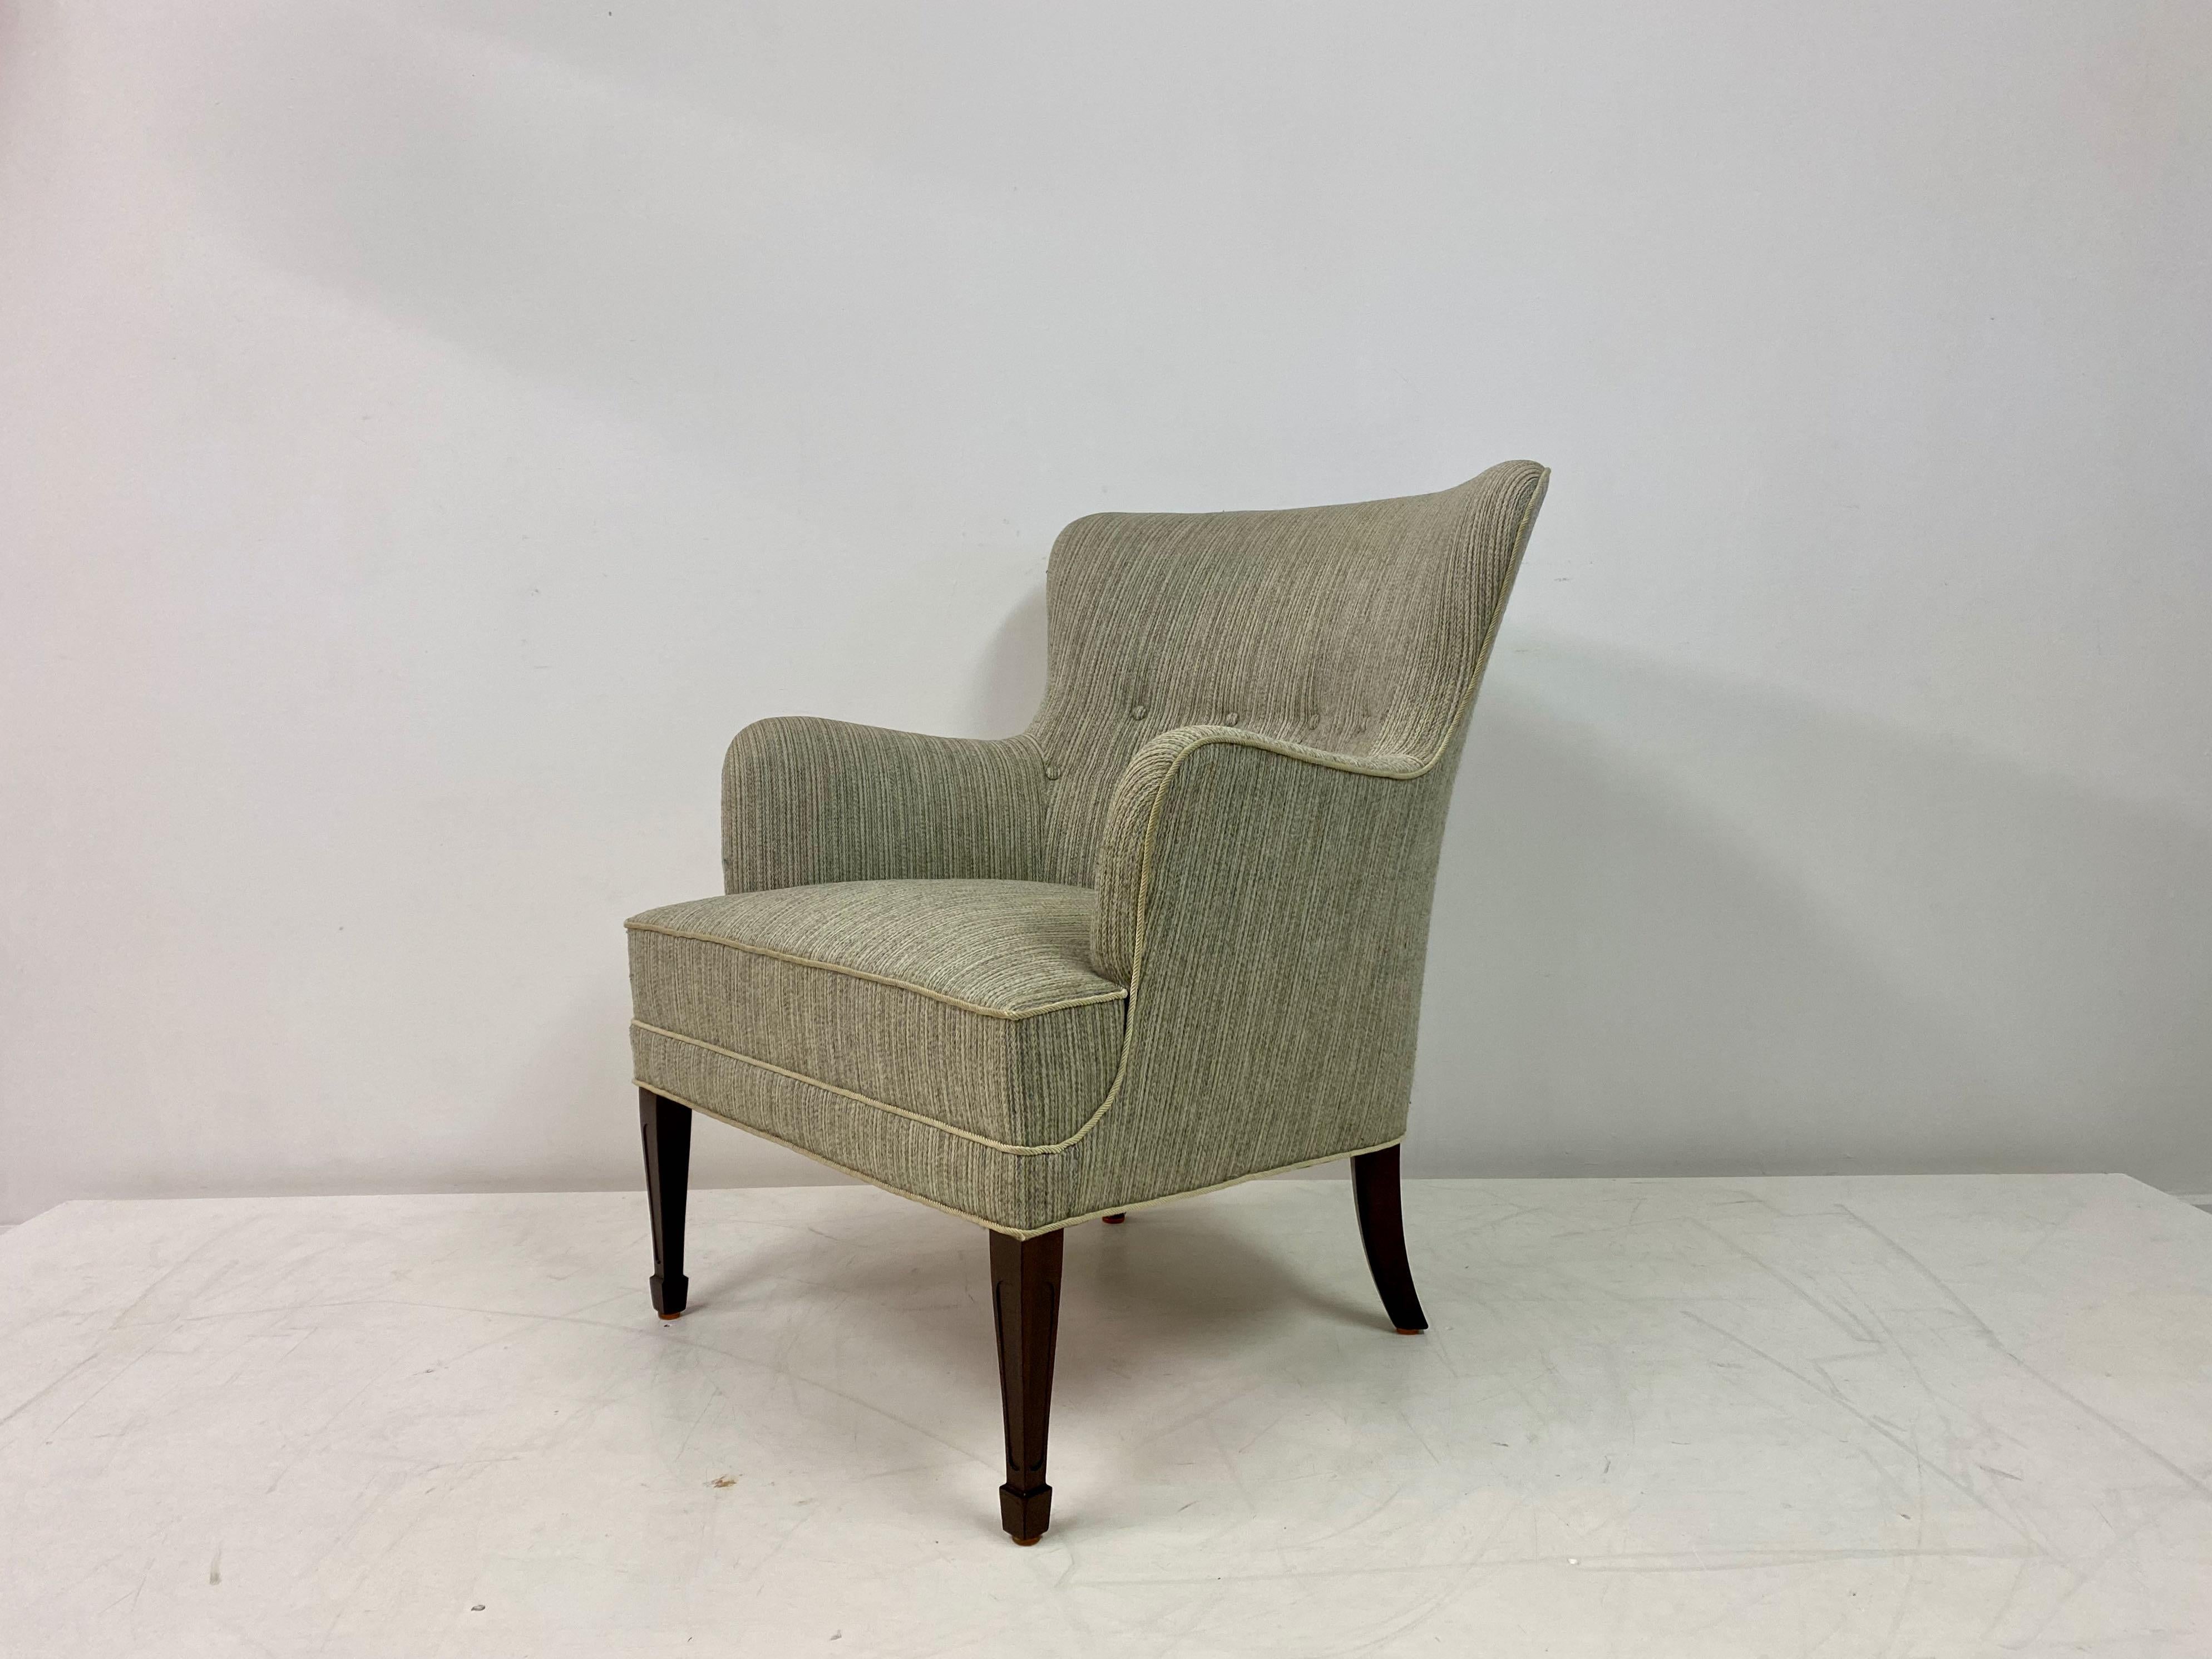 1950s Danish Armchair by Frits Henningsen In Good Condition For Sale In London, London